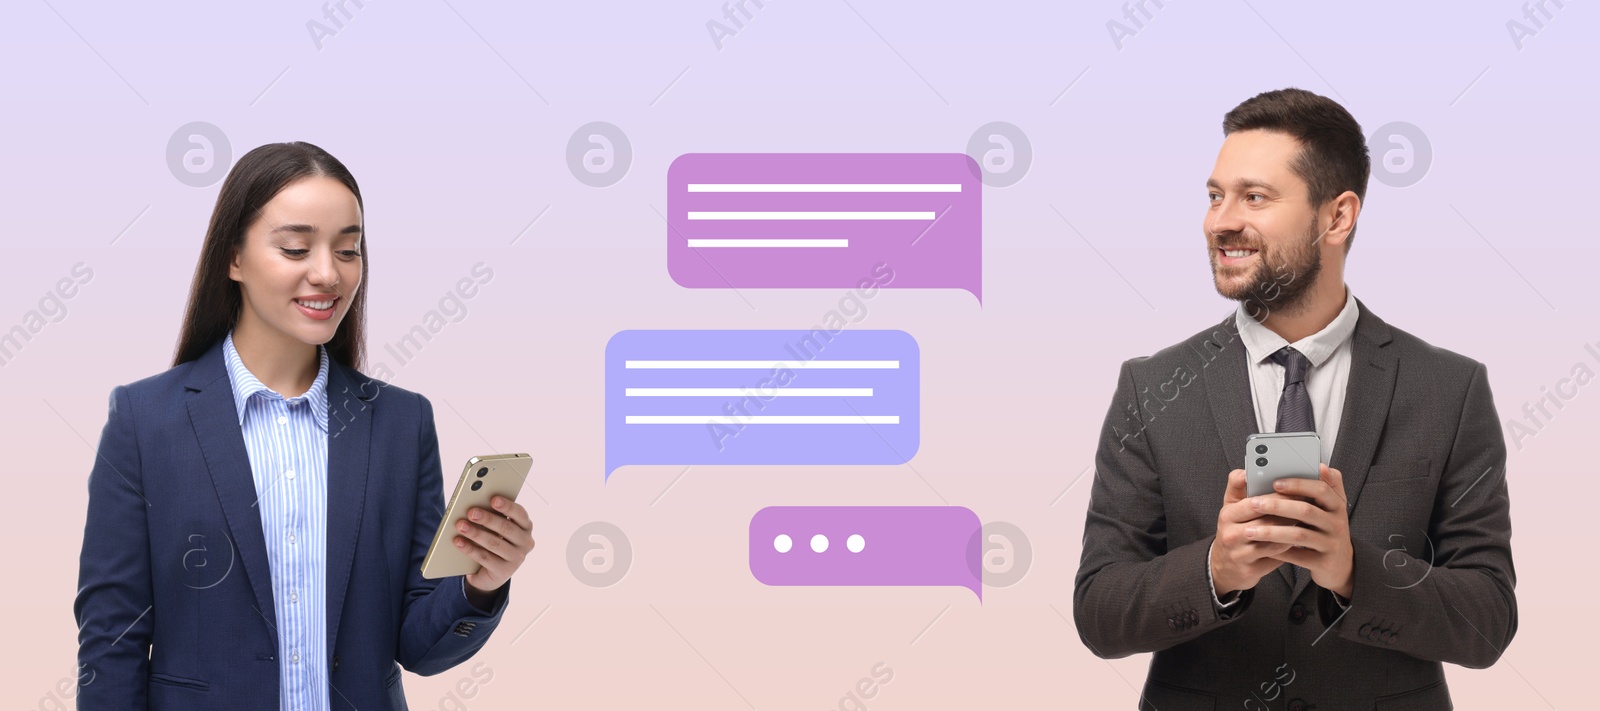 Image of Man and woman with smartphones texting on color gradient background, banner design. Message bubbles between them